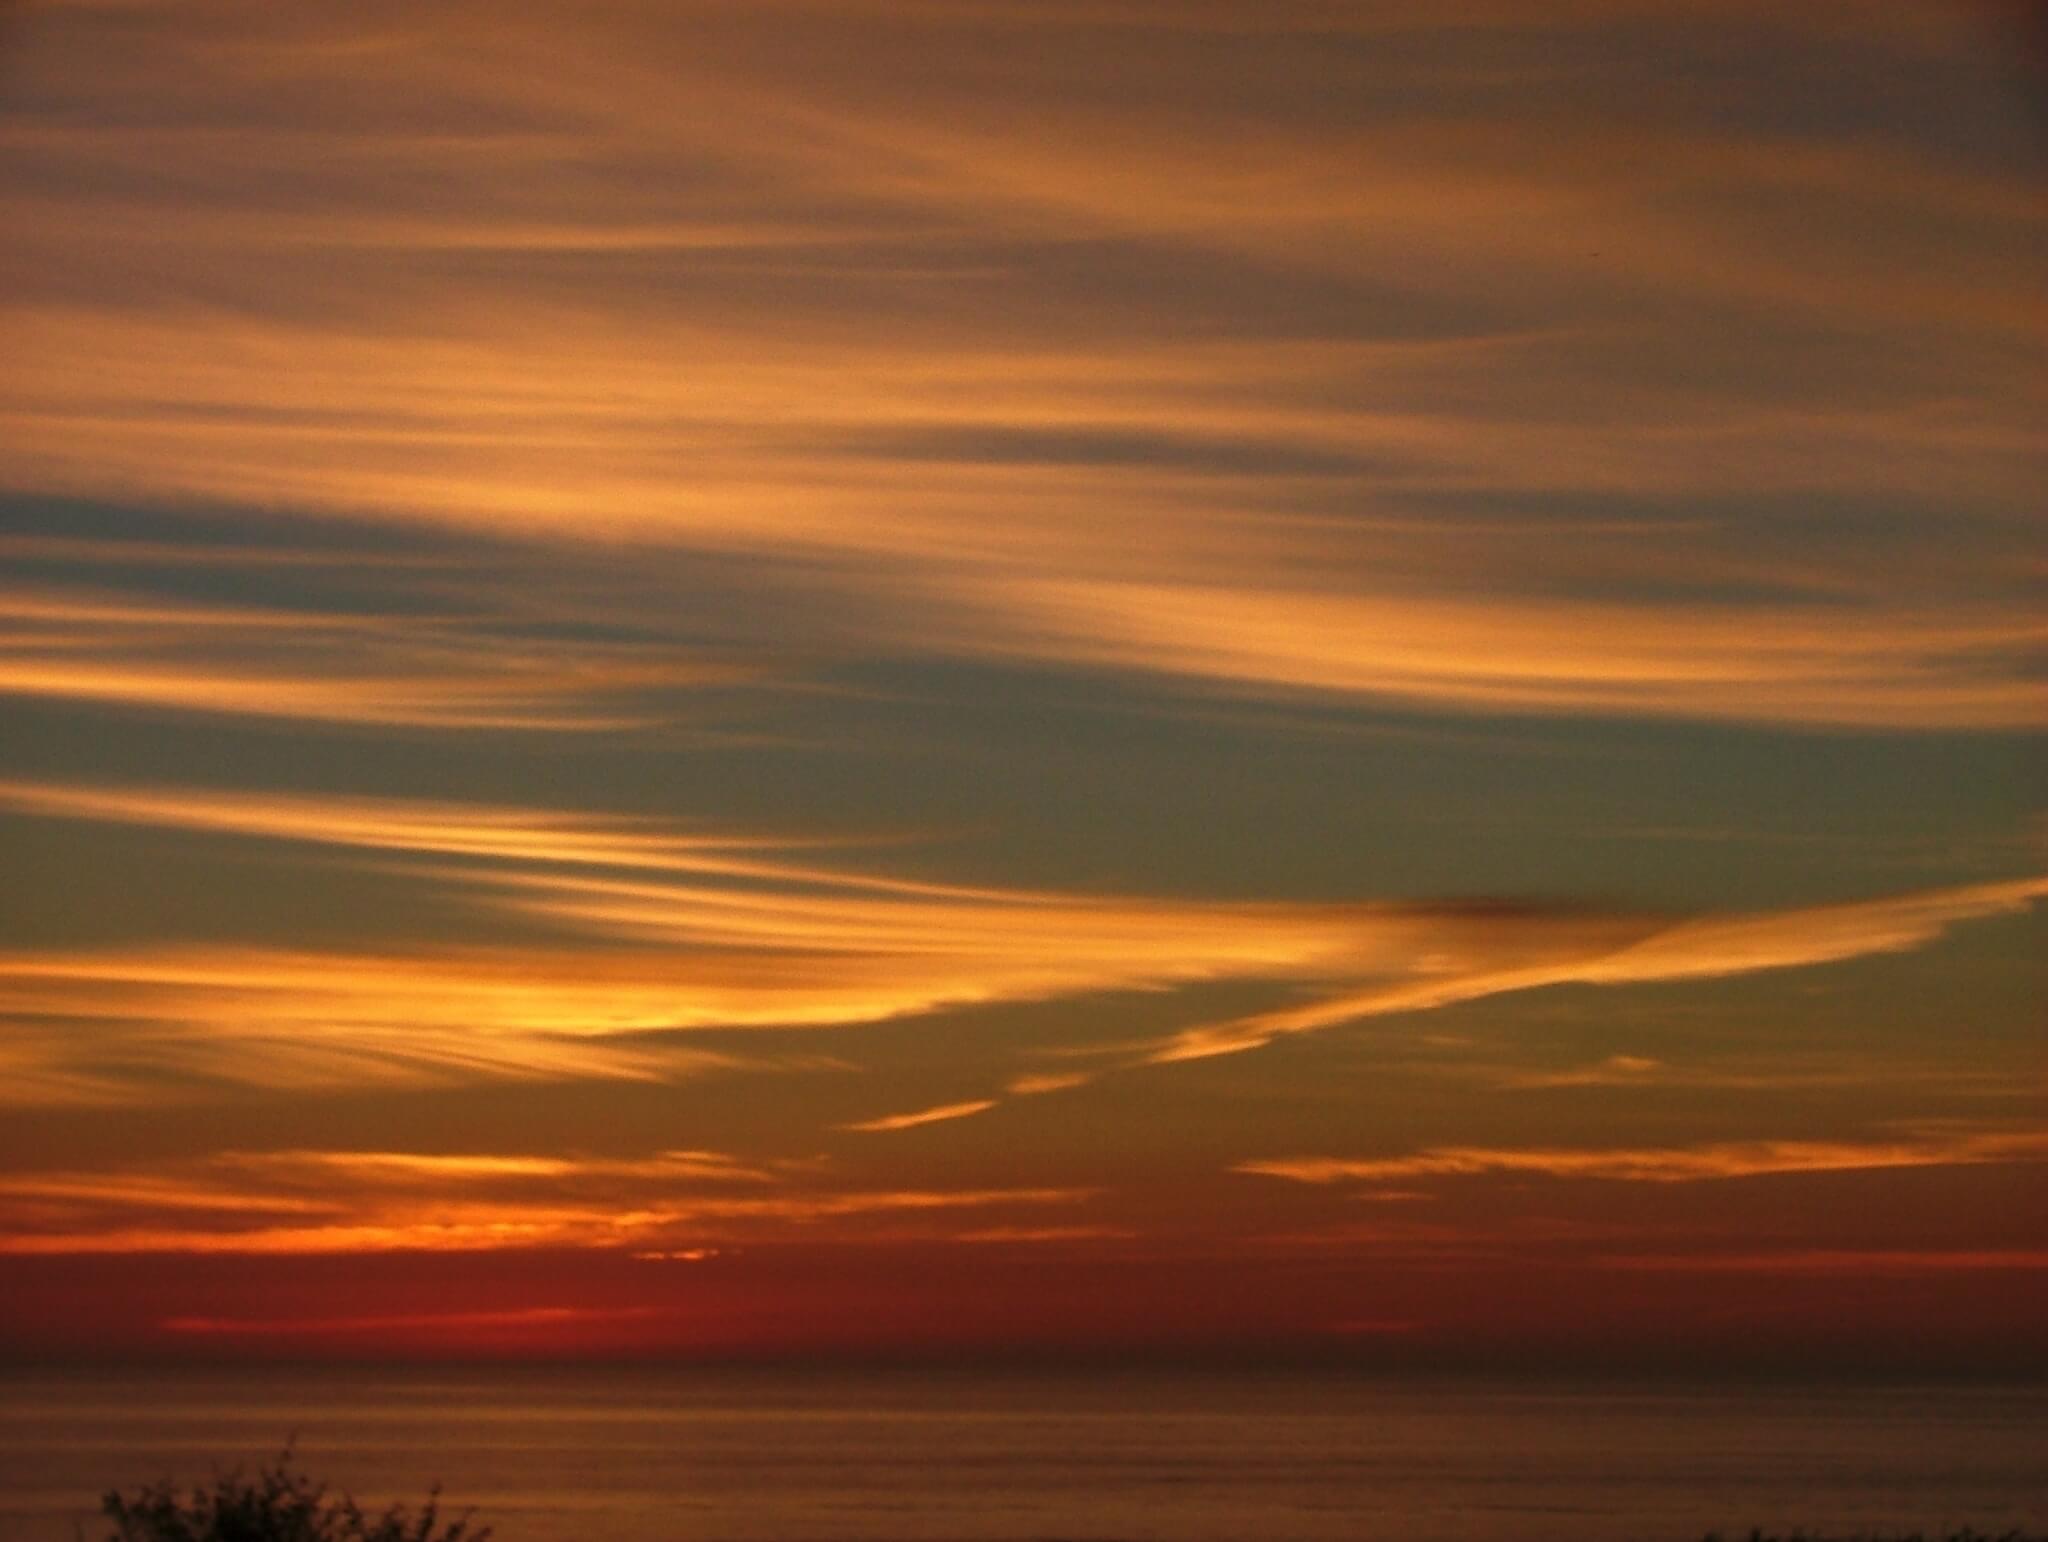 Photograph of colorful cirrus clouds at sunrise.